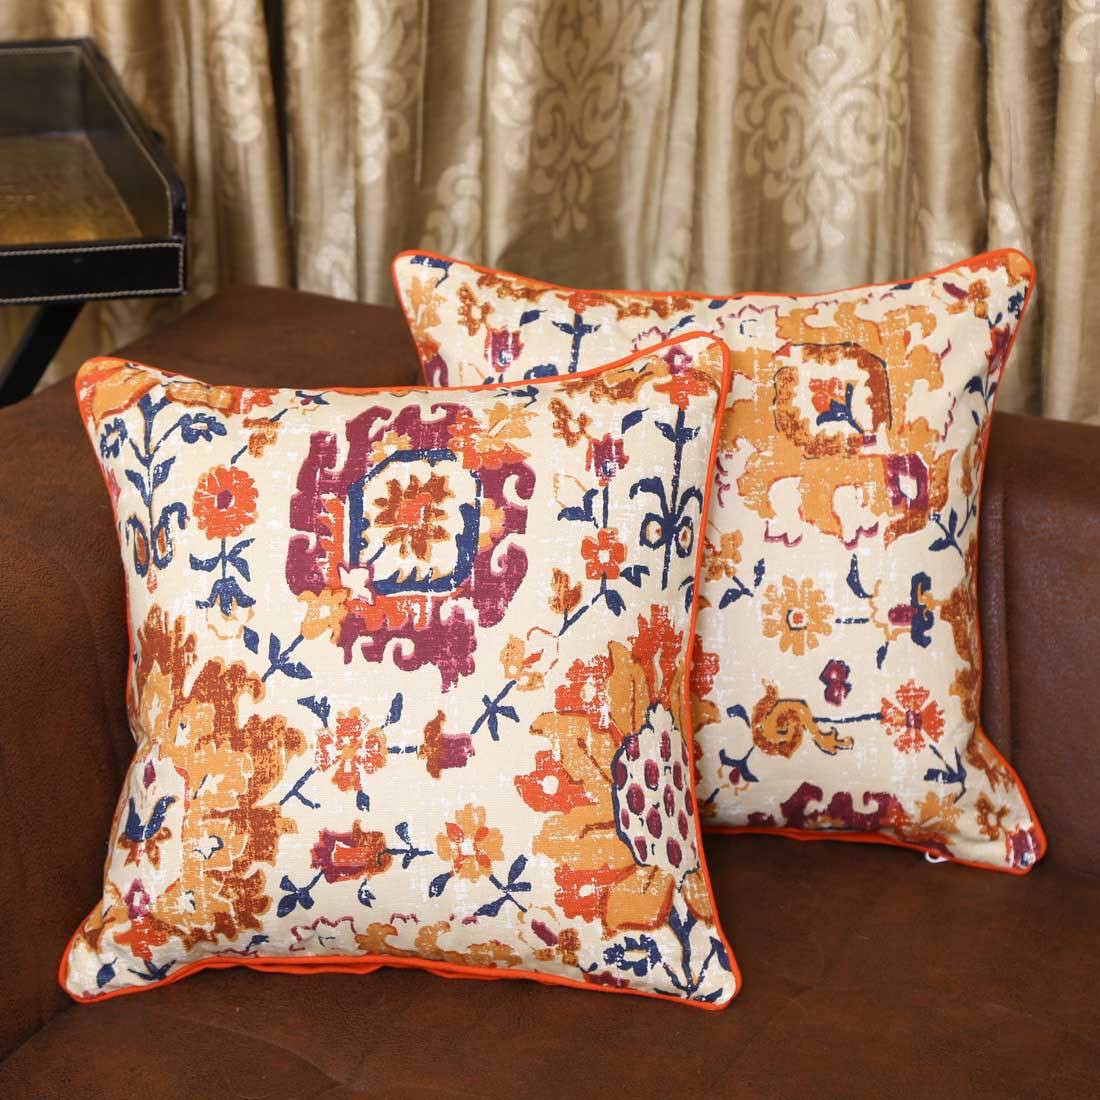  BILBERRY Furnishing Printed Cushions Cover (Pack of 2, 24 cm*24 cm, Multicolor)